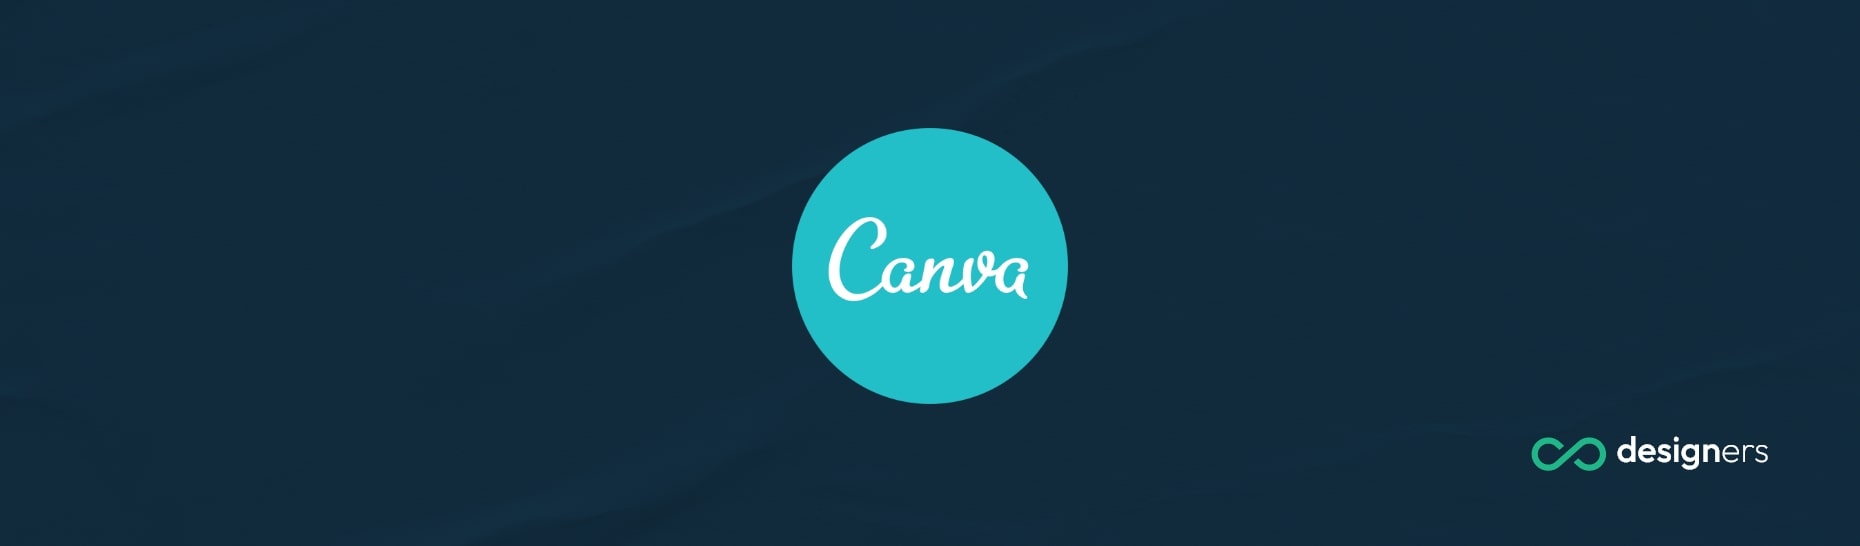 What Is a Canva Collage?